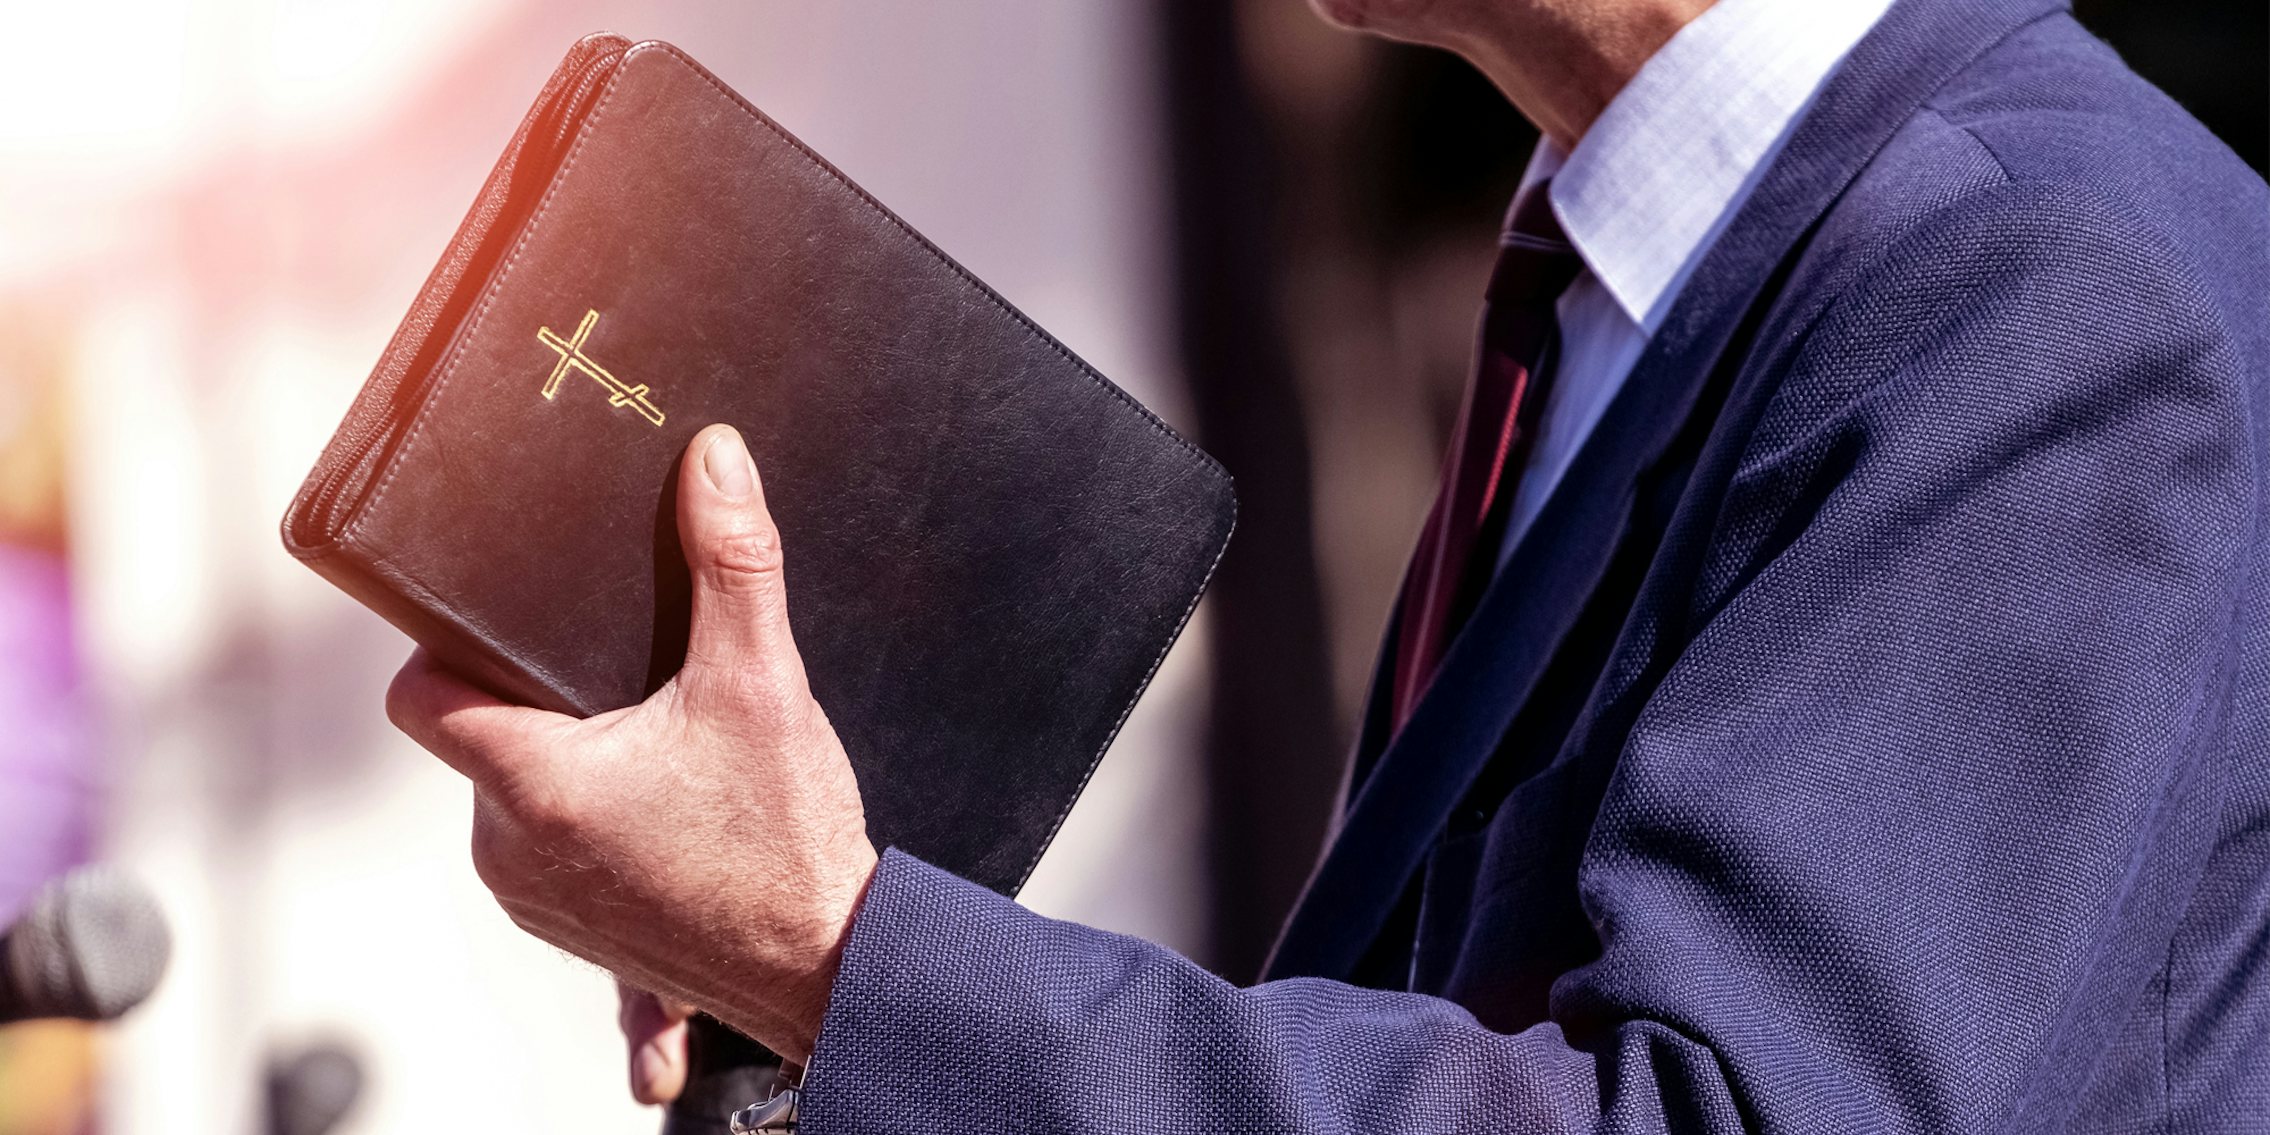 Pastor holding bible speaking into microphone